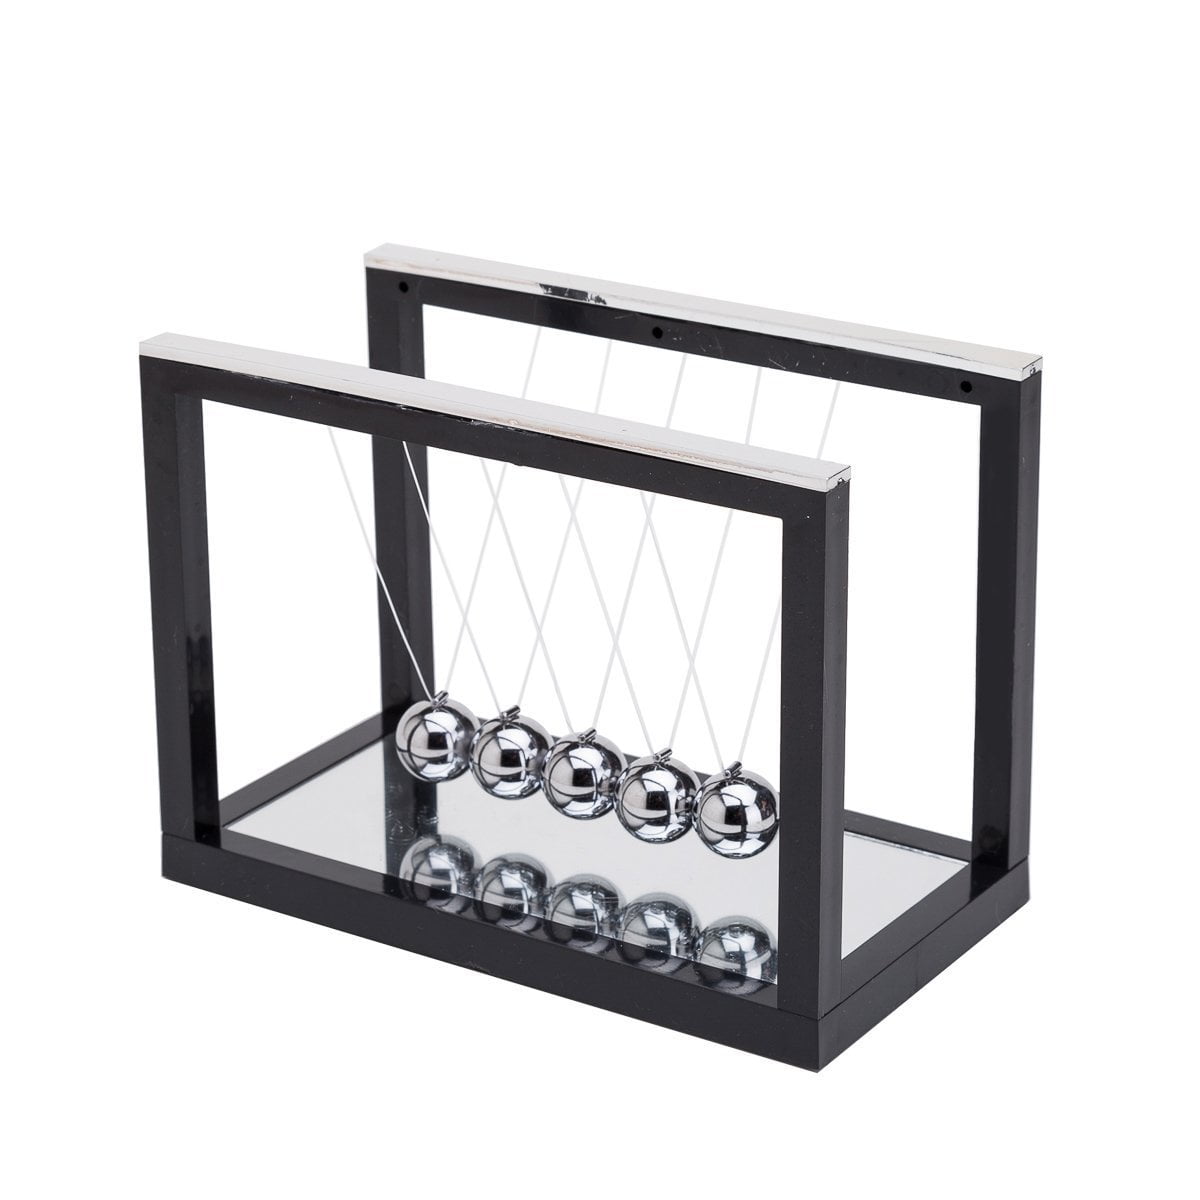 Boxed Retro Office Gadget Gift New Desktop Silver Newtons Cradle Executive Toy 